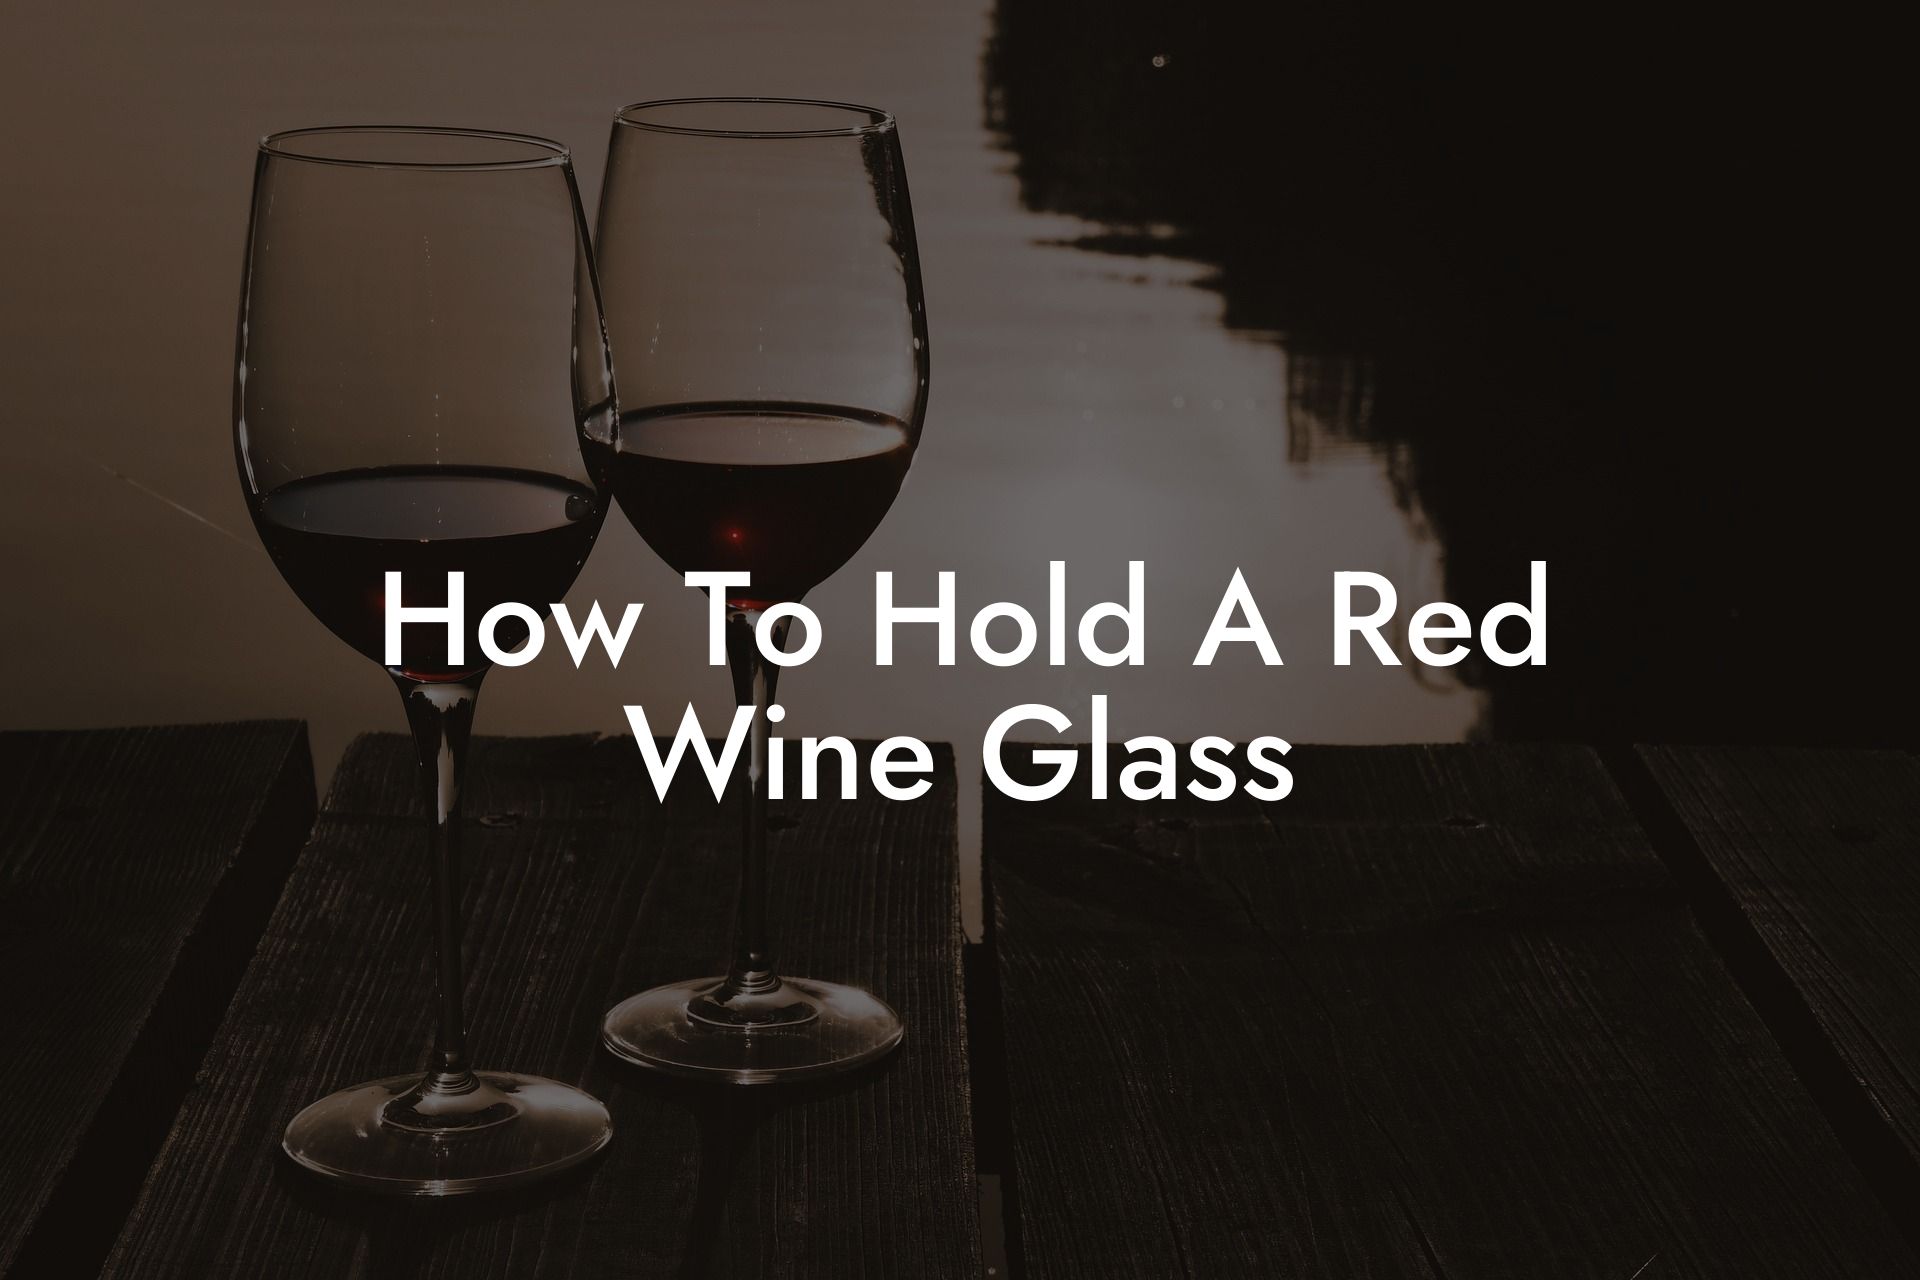 How To Hold A Red Wine Glass